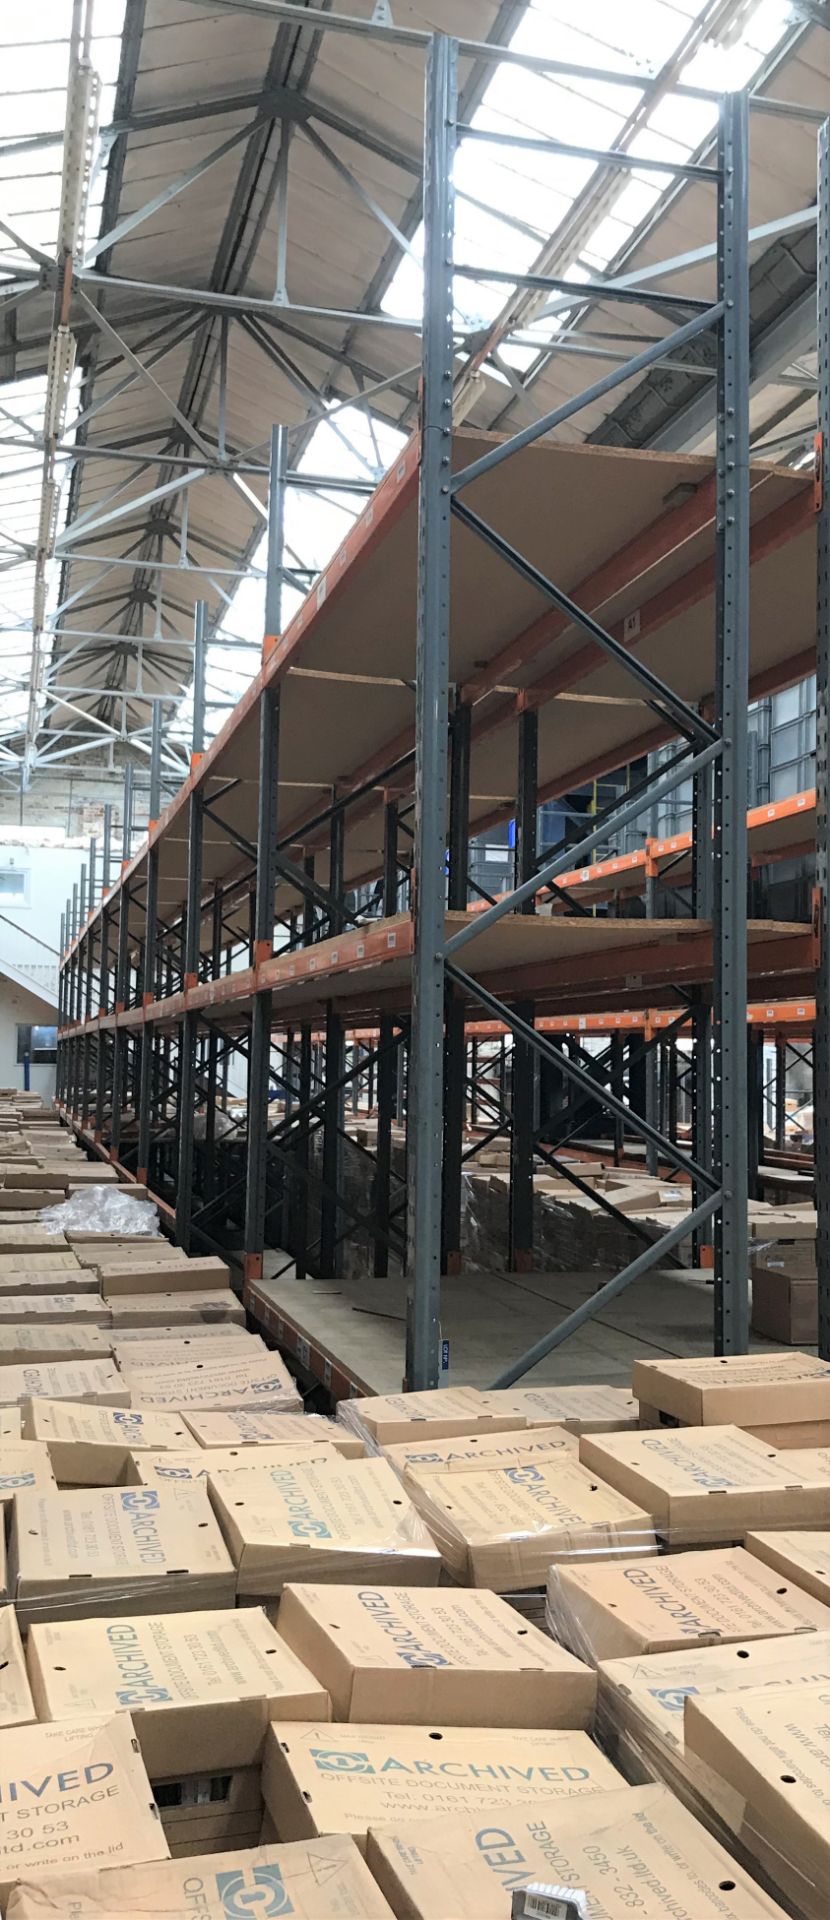 10 bays of 3 tier Boltless Steel Pallet Racking with Boarded Shelving comprising: 11 Dexion - Image 2 of 2